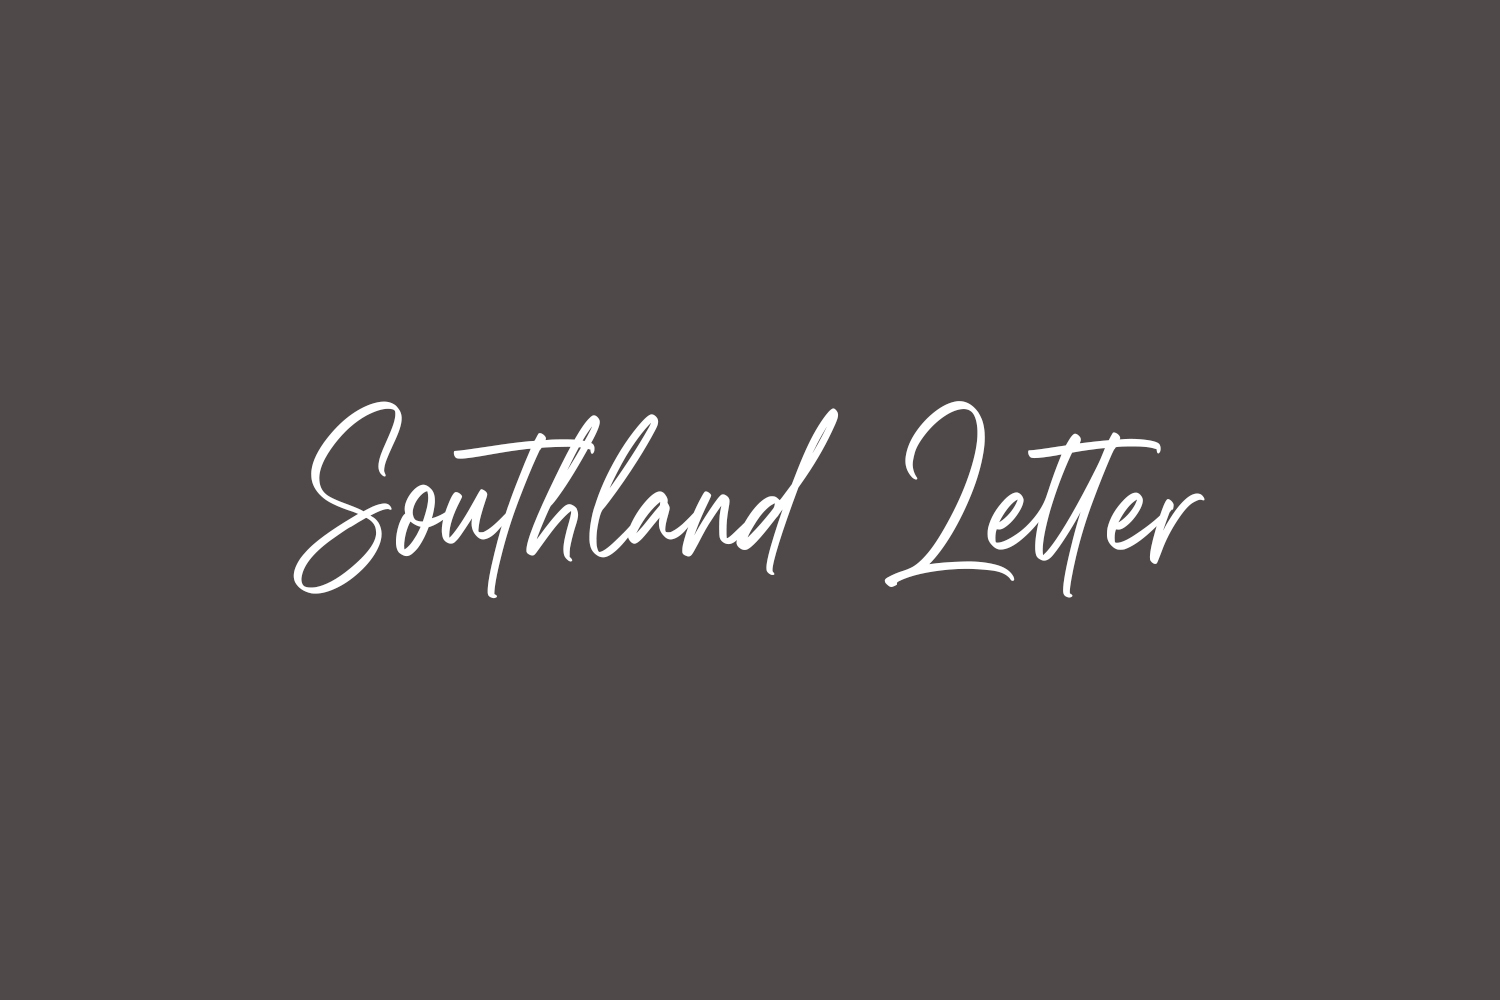 Southland Letter Free Font